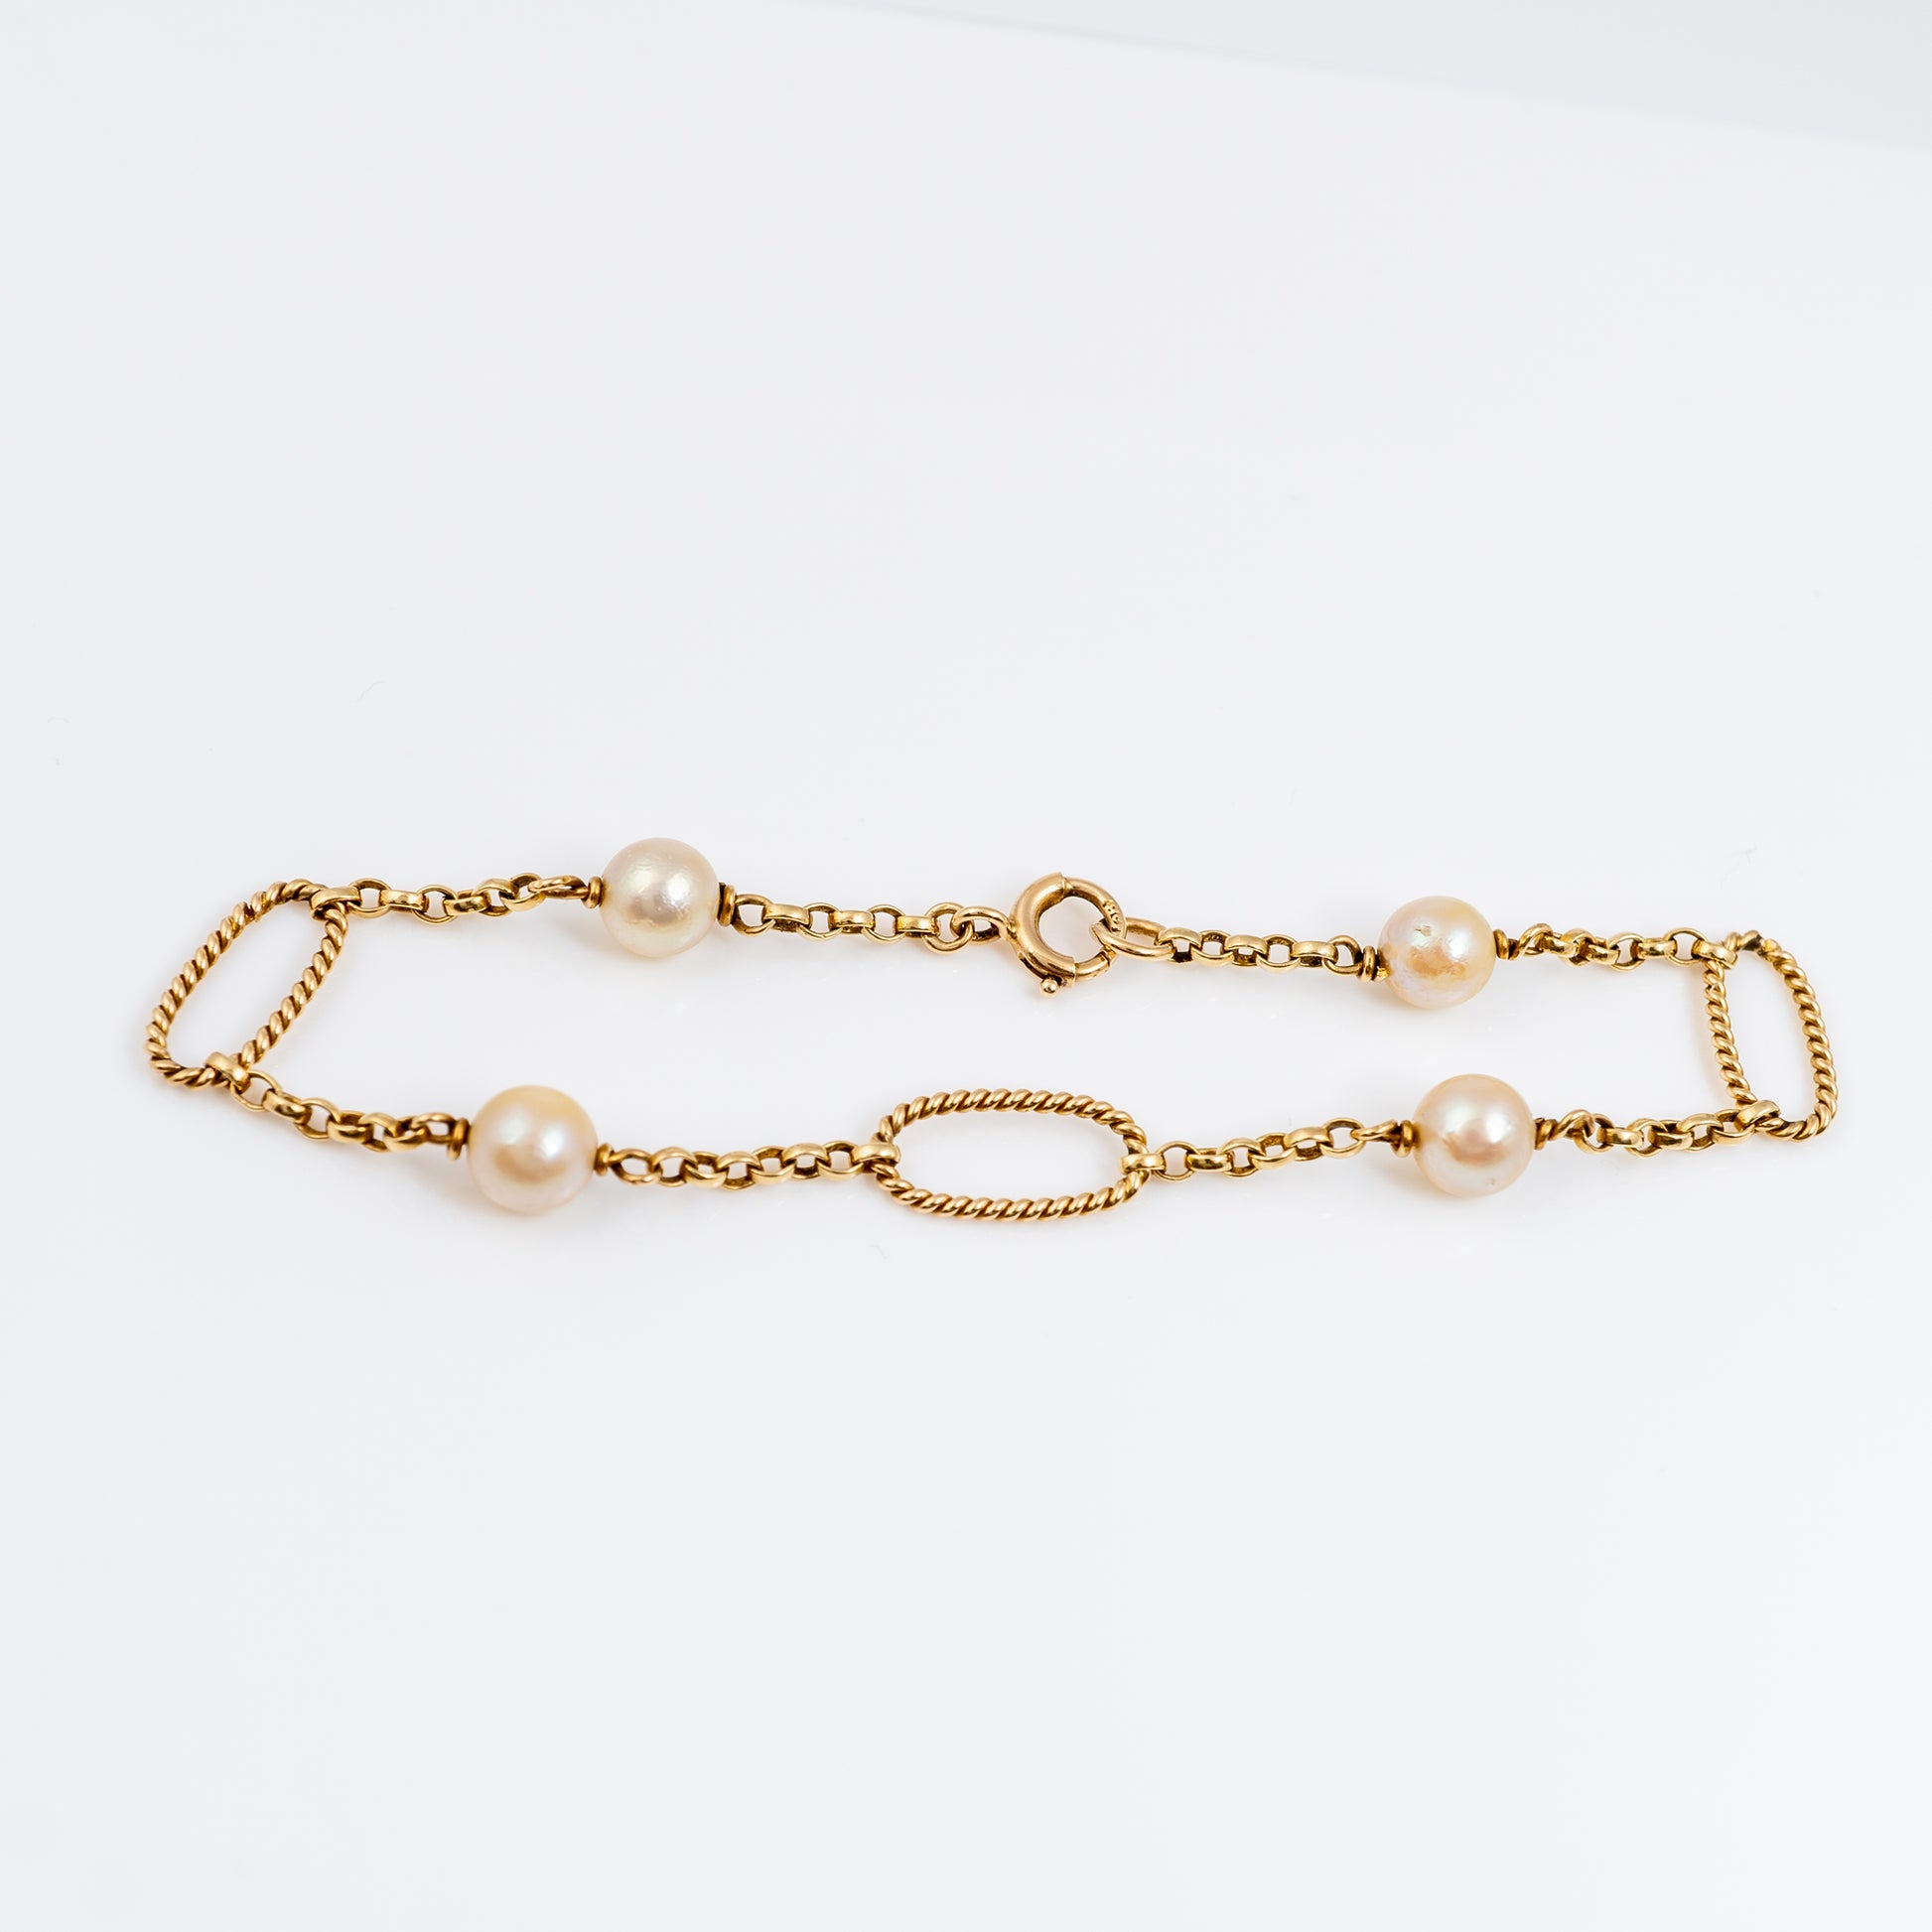 9ct gold pear bracelet 17.5 inches